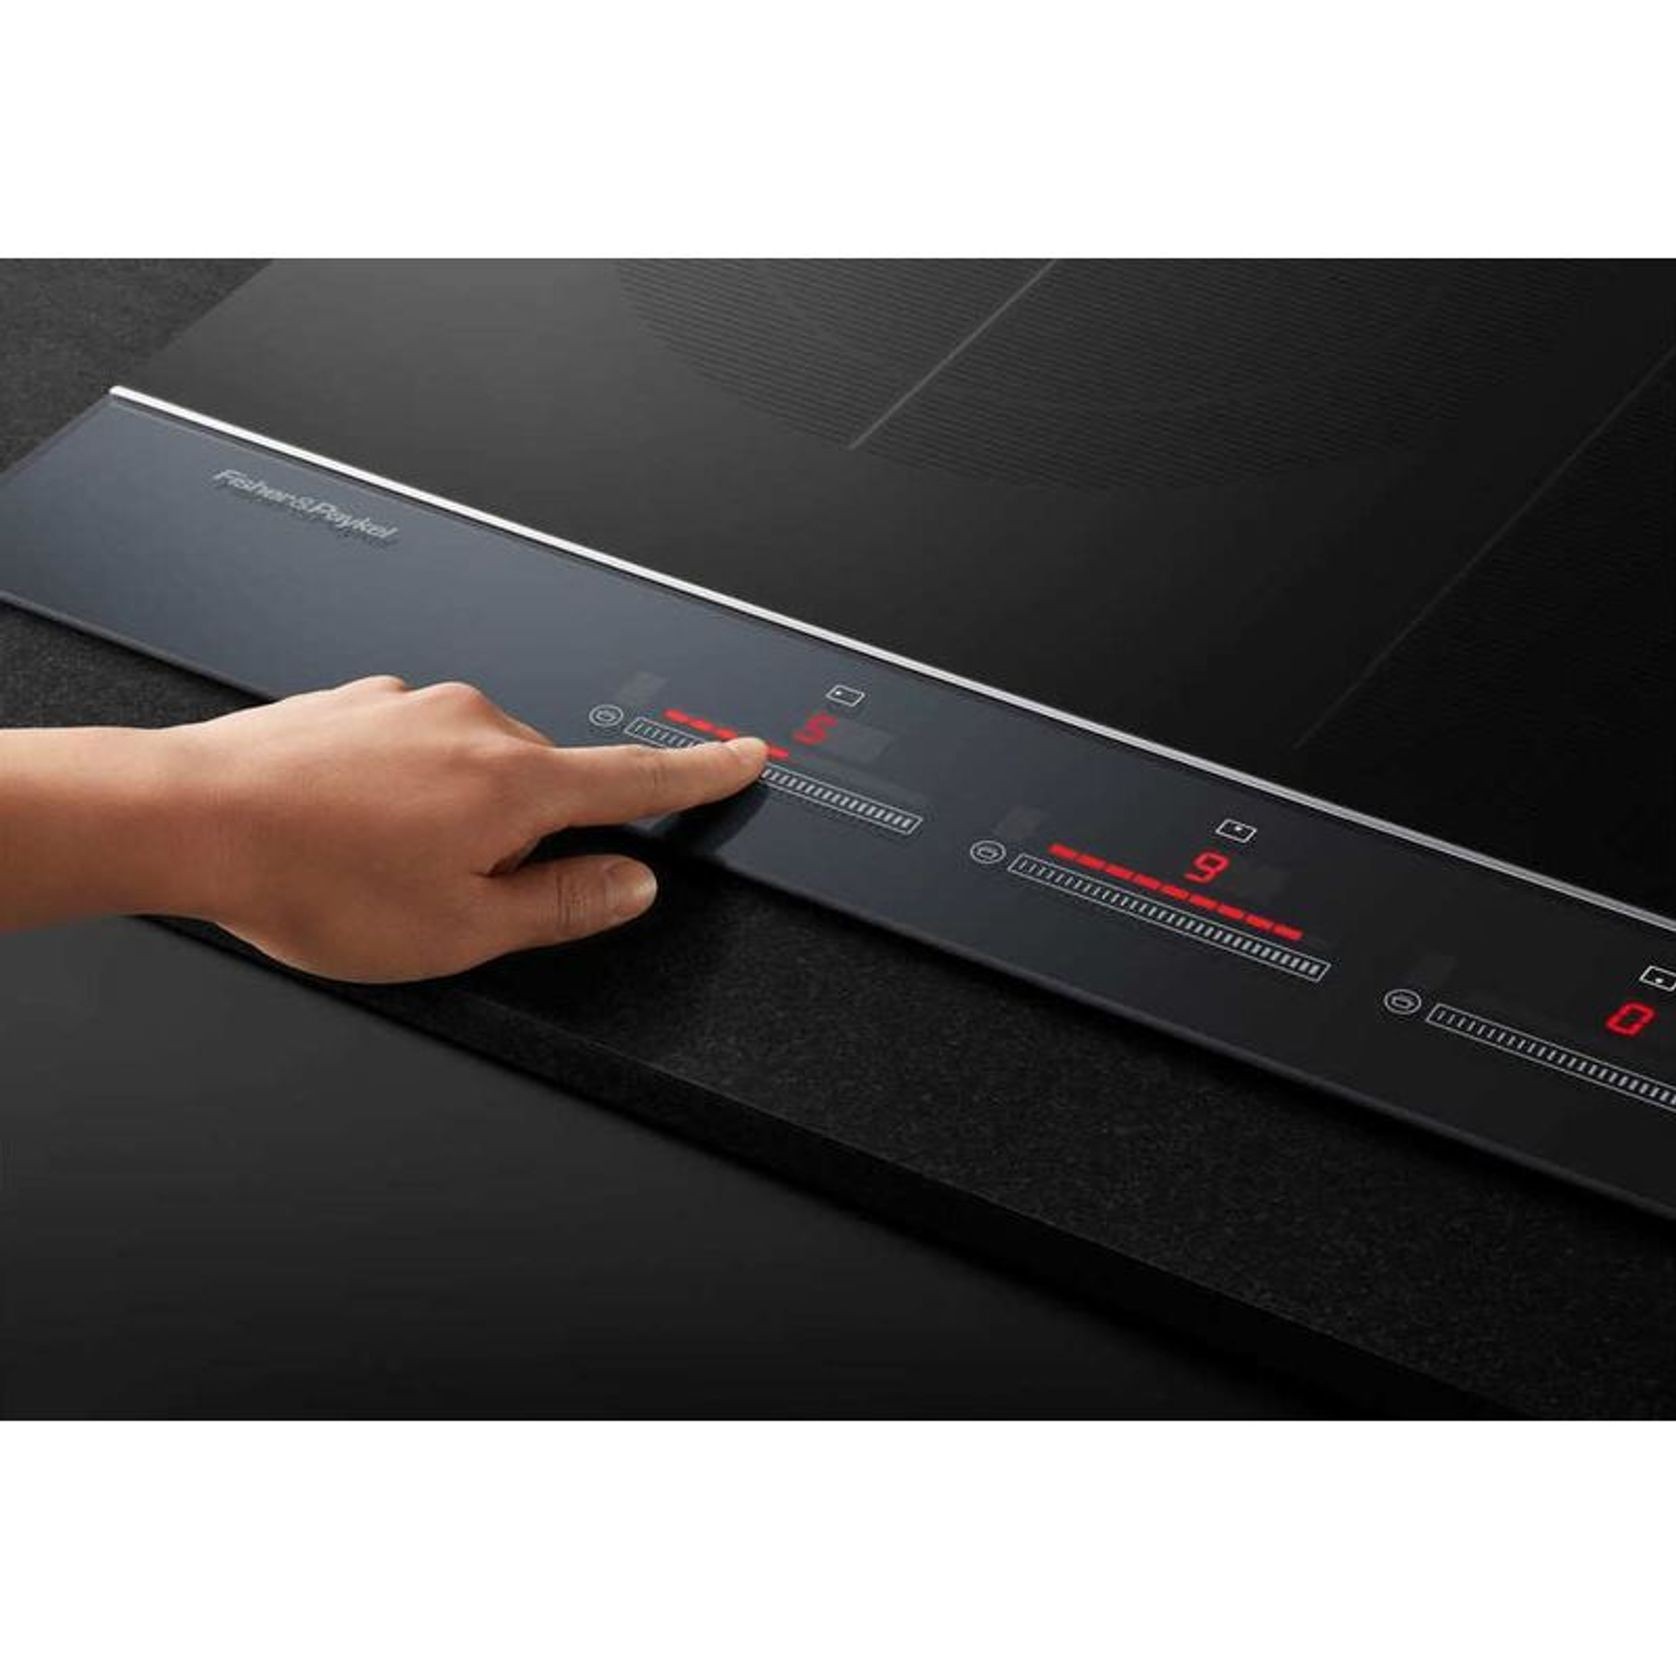 90cm Induction Cooktop by Fisher & Paykel   gallery detail image